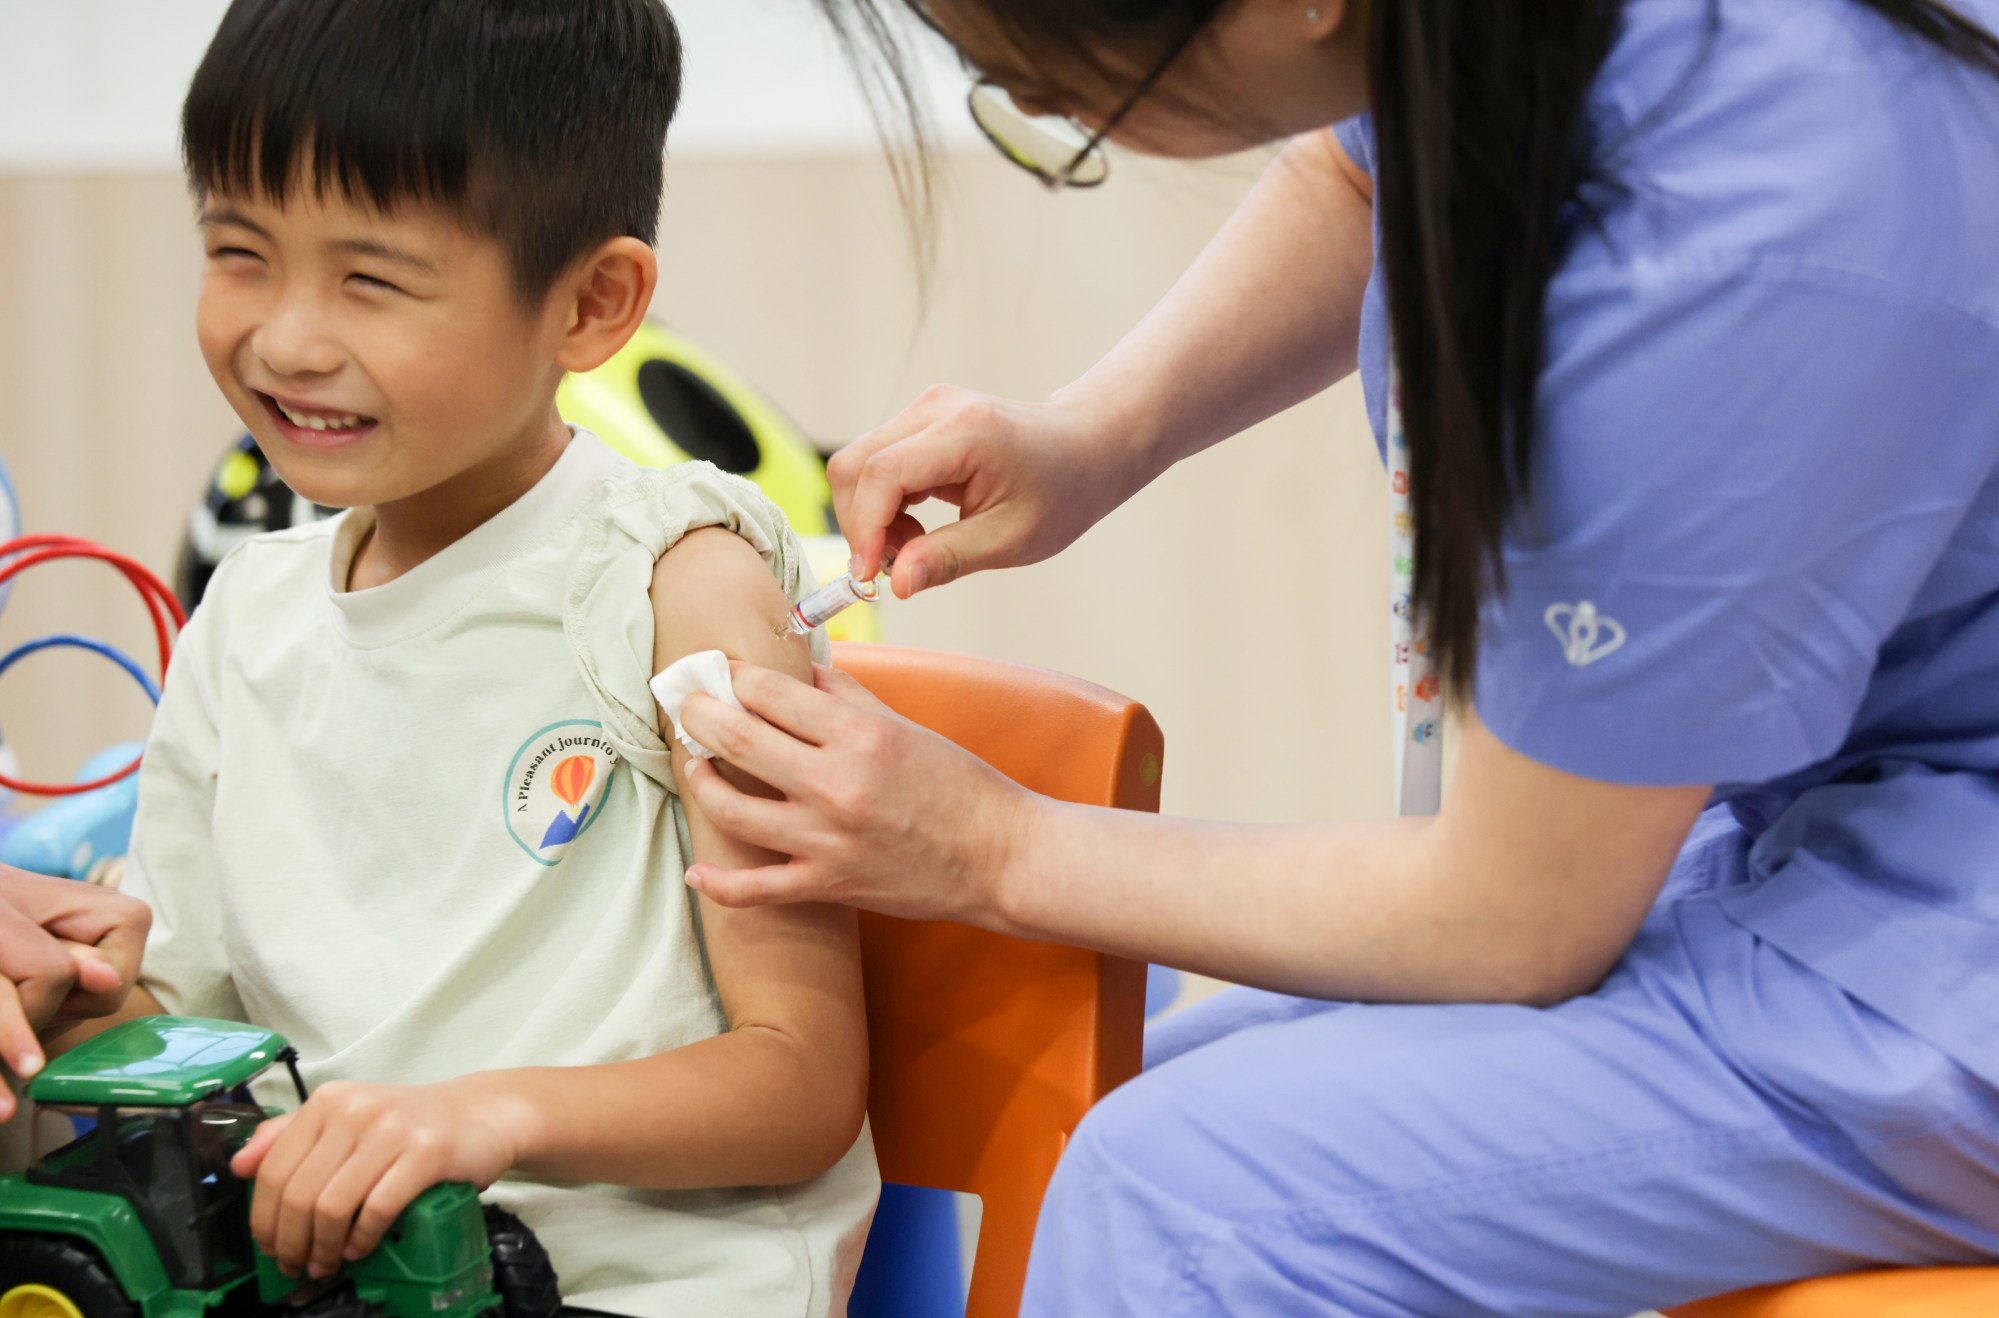 unvaccinated 8-year-old hongkonger dies after contracting flu, amid warnings over risks of low inoculation rate for children